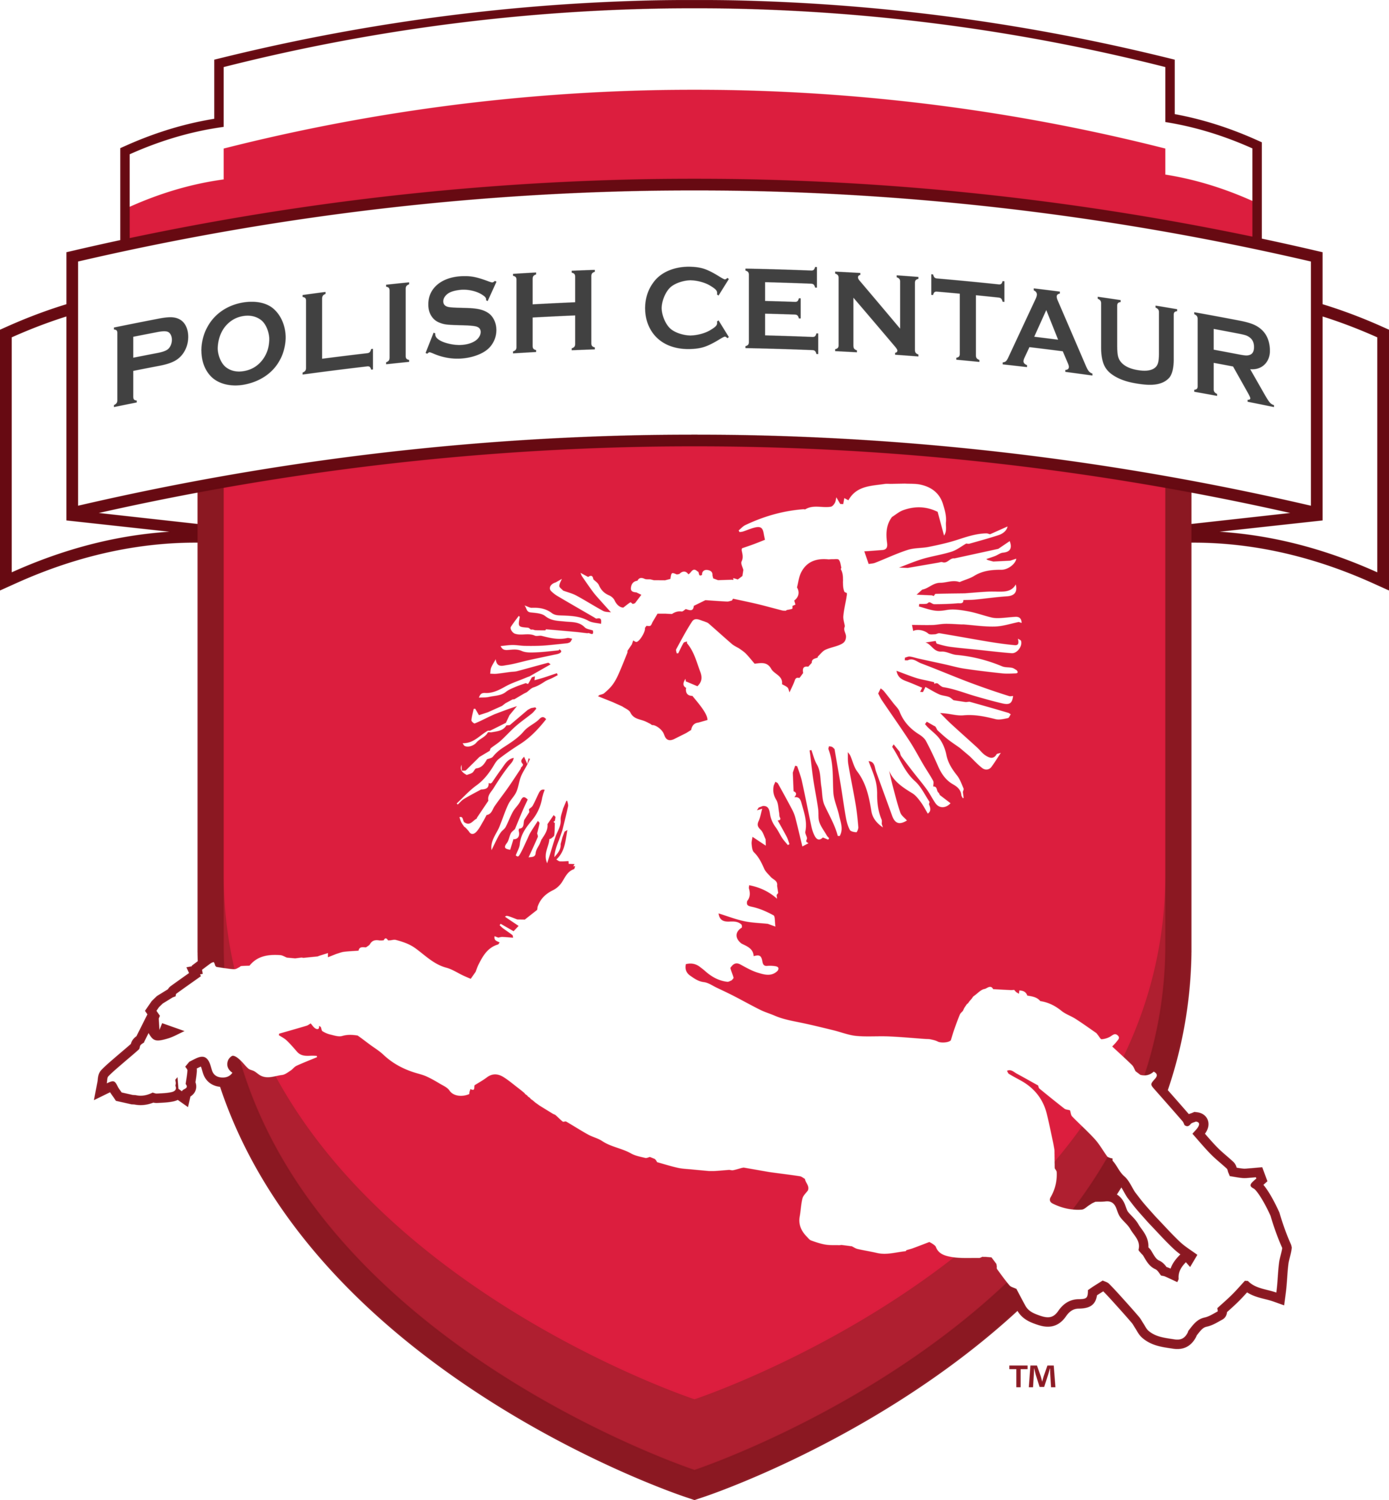 Polish Centaur | Fundraiser for the Building of the Great Statue of Victory